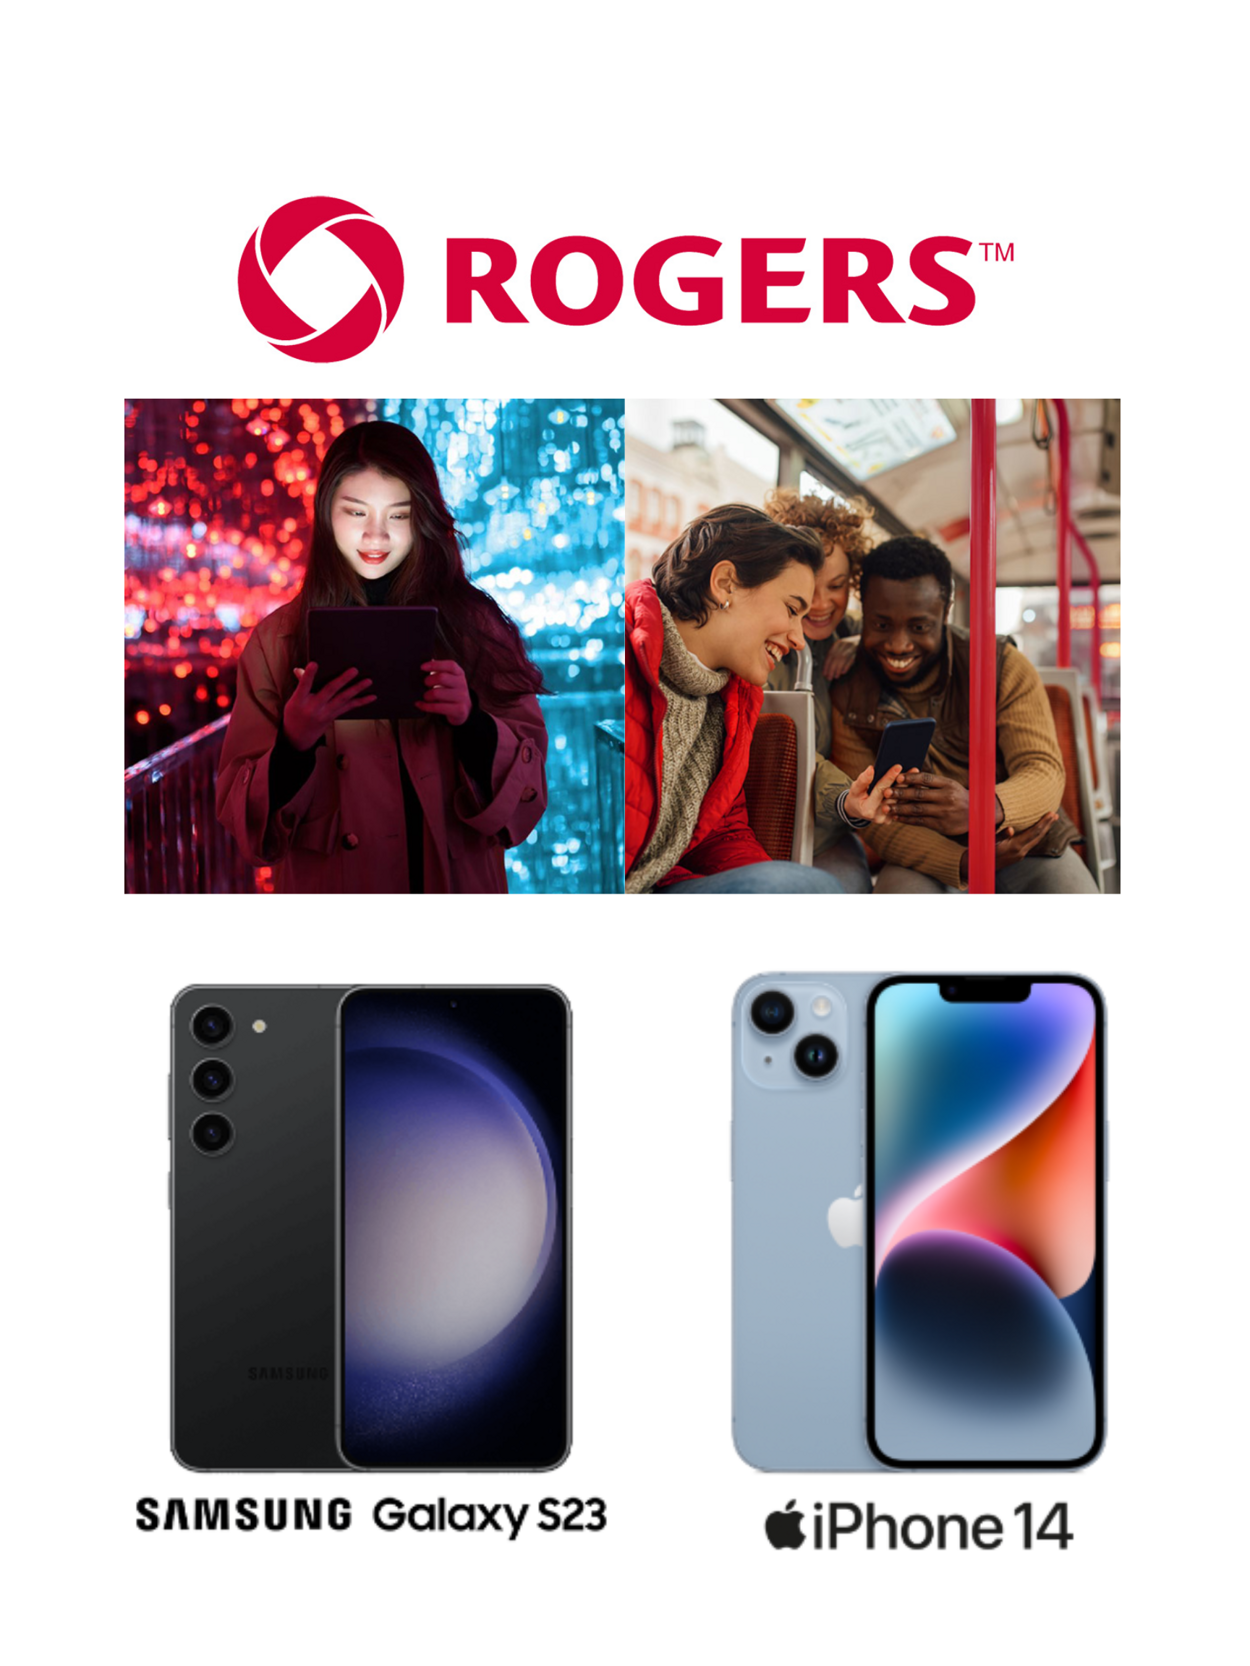 Rogers Circulaires